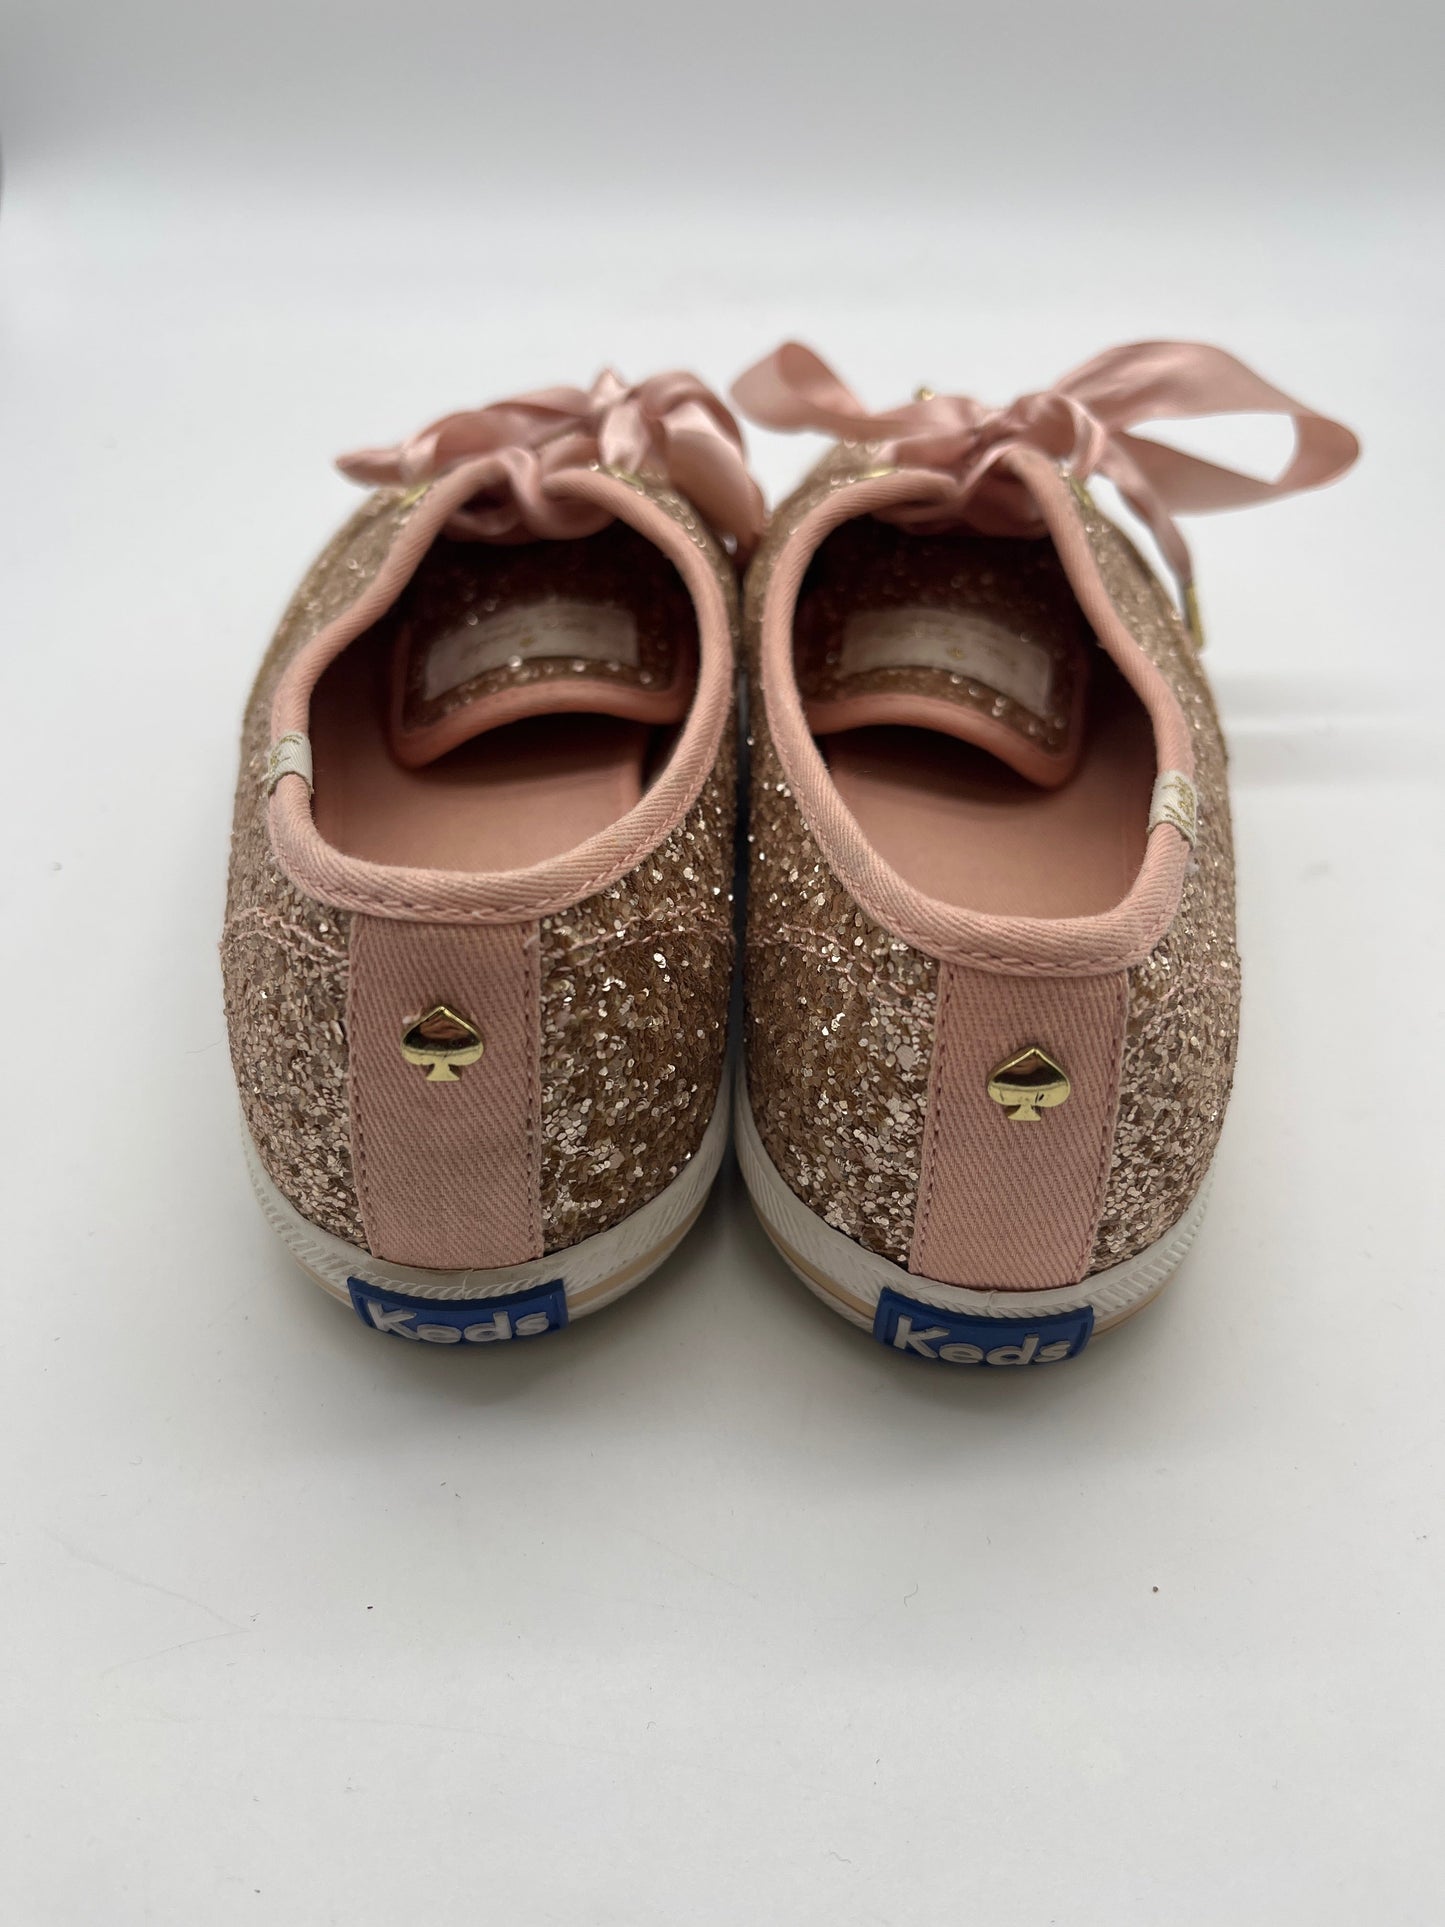 Pink Shoes Sneakers Keds, Size 8